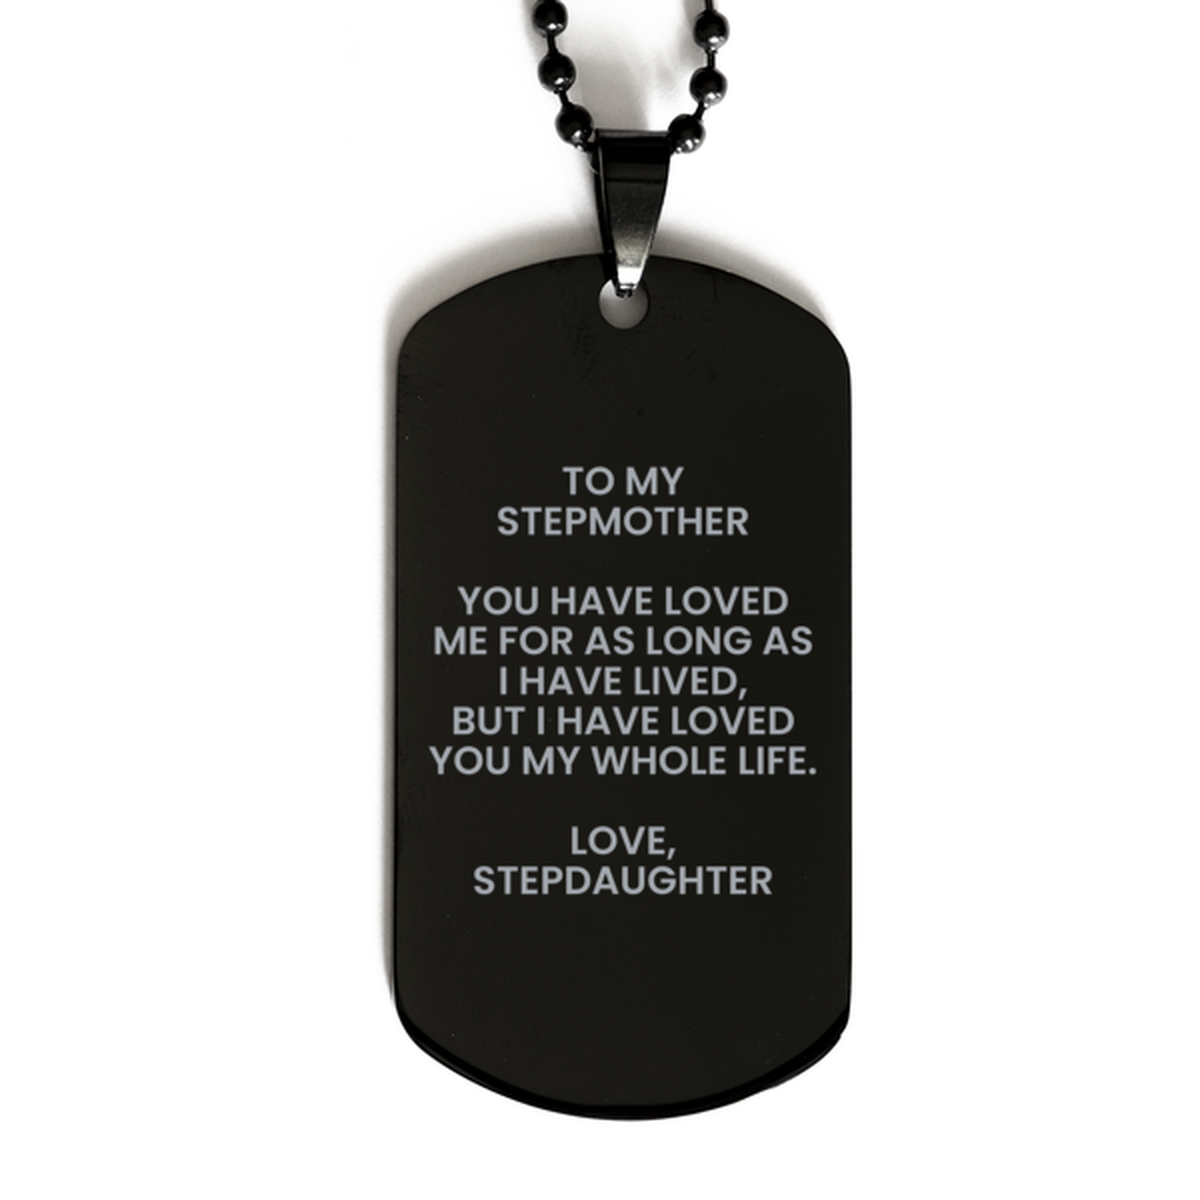 To My Stepmother   Black Dog Tag, Loved You My Whole Life, Valentines Gifts For Stepmother From Stepdaughter, Birthday Gifts For Women